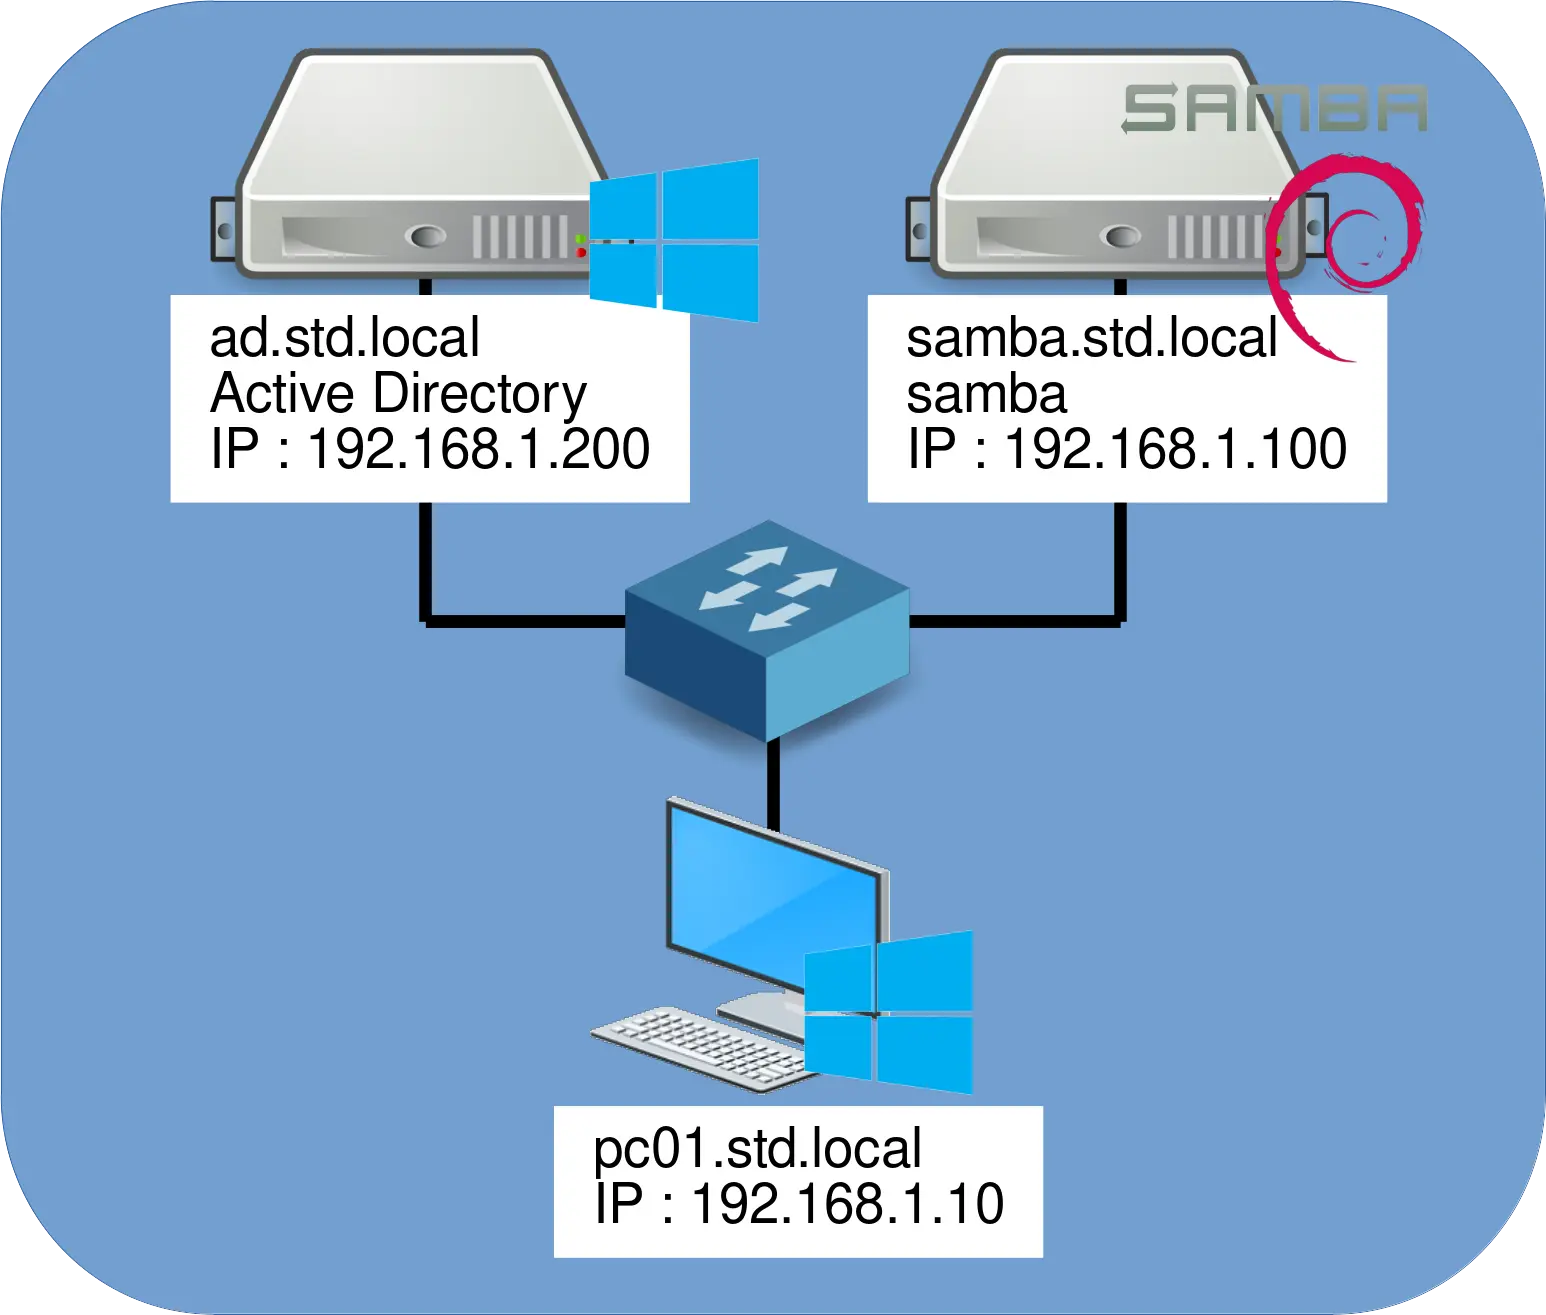 Winbind architecture with one Active Directory server, one Samba server, and one Windows client.